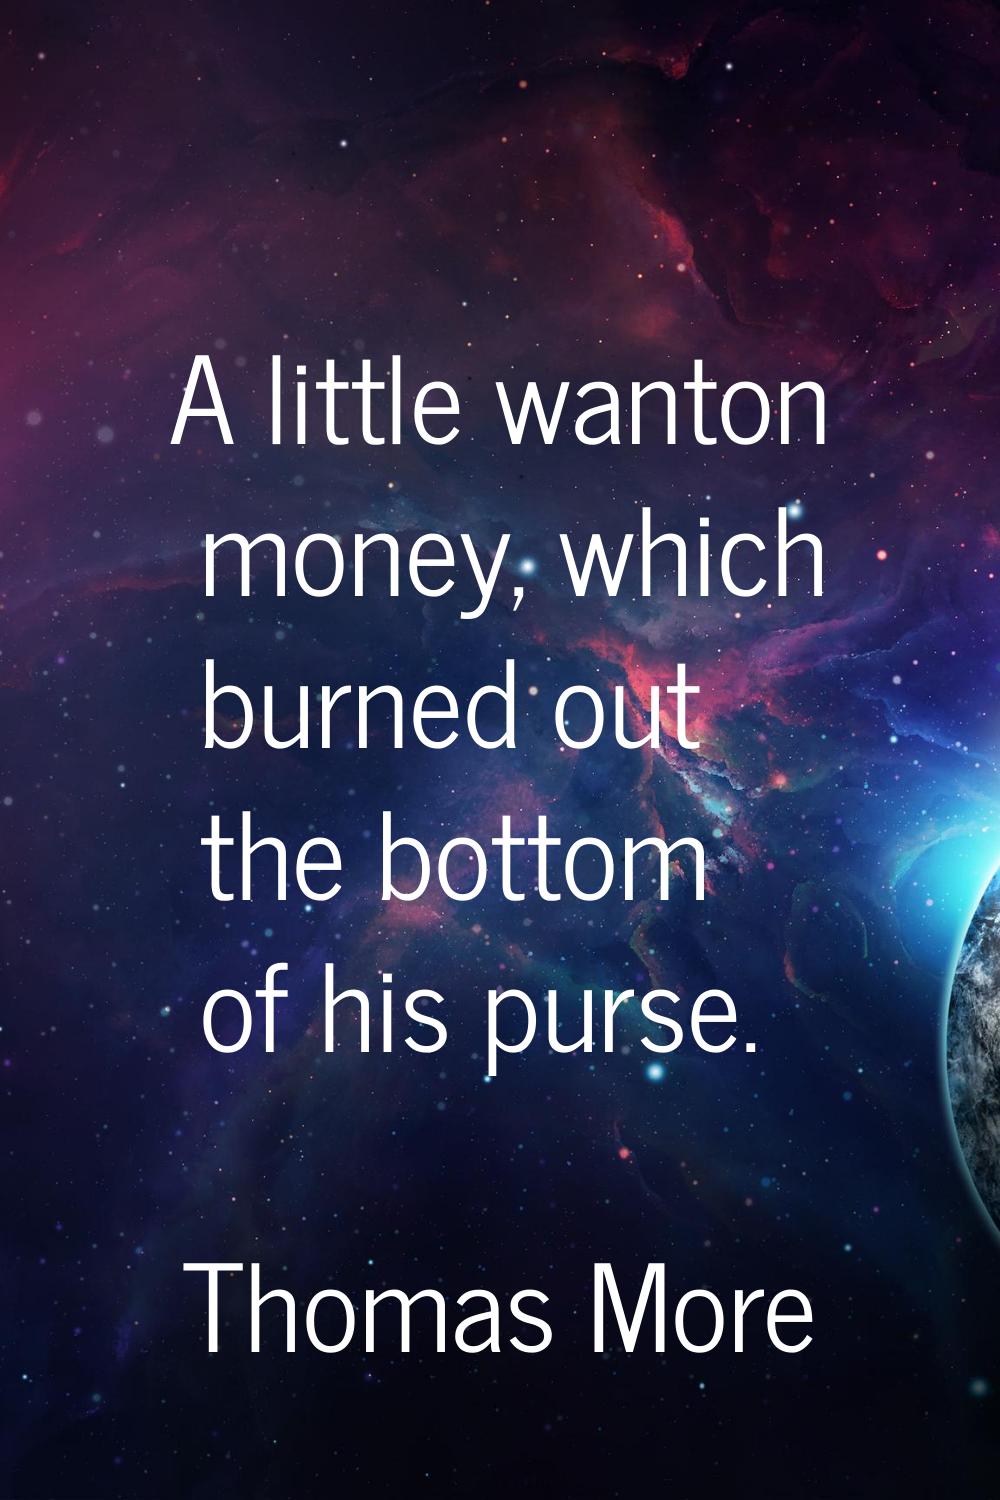 A little wanton money, which burned out the bottom of his purse.